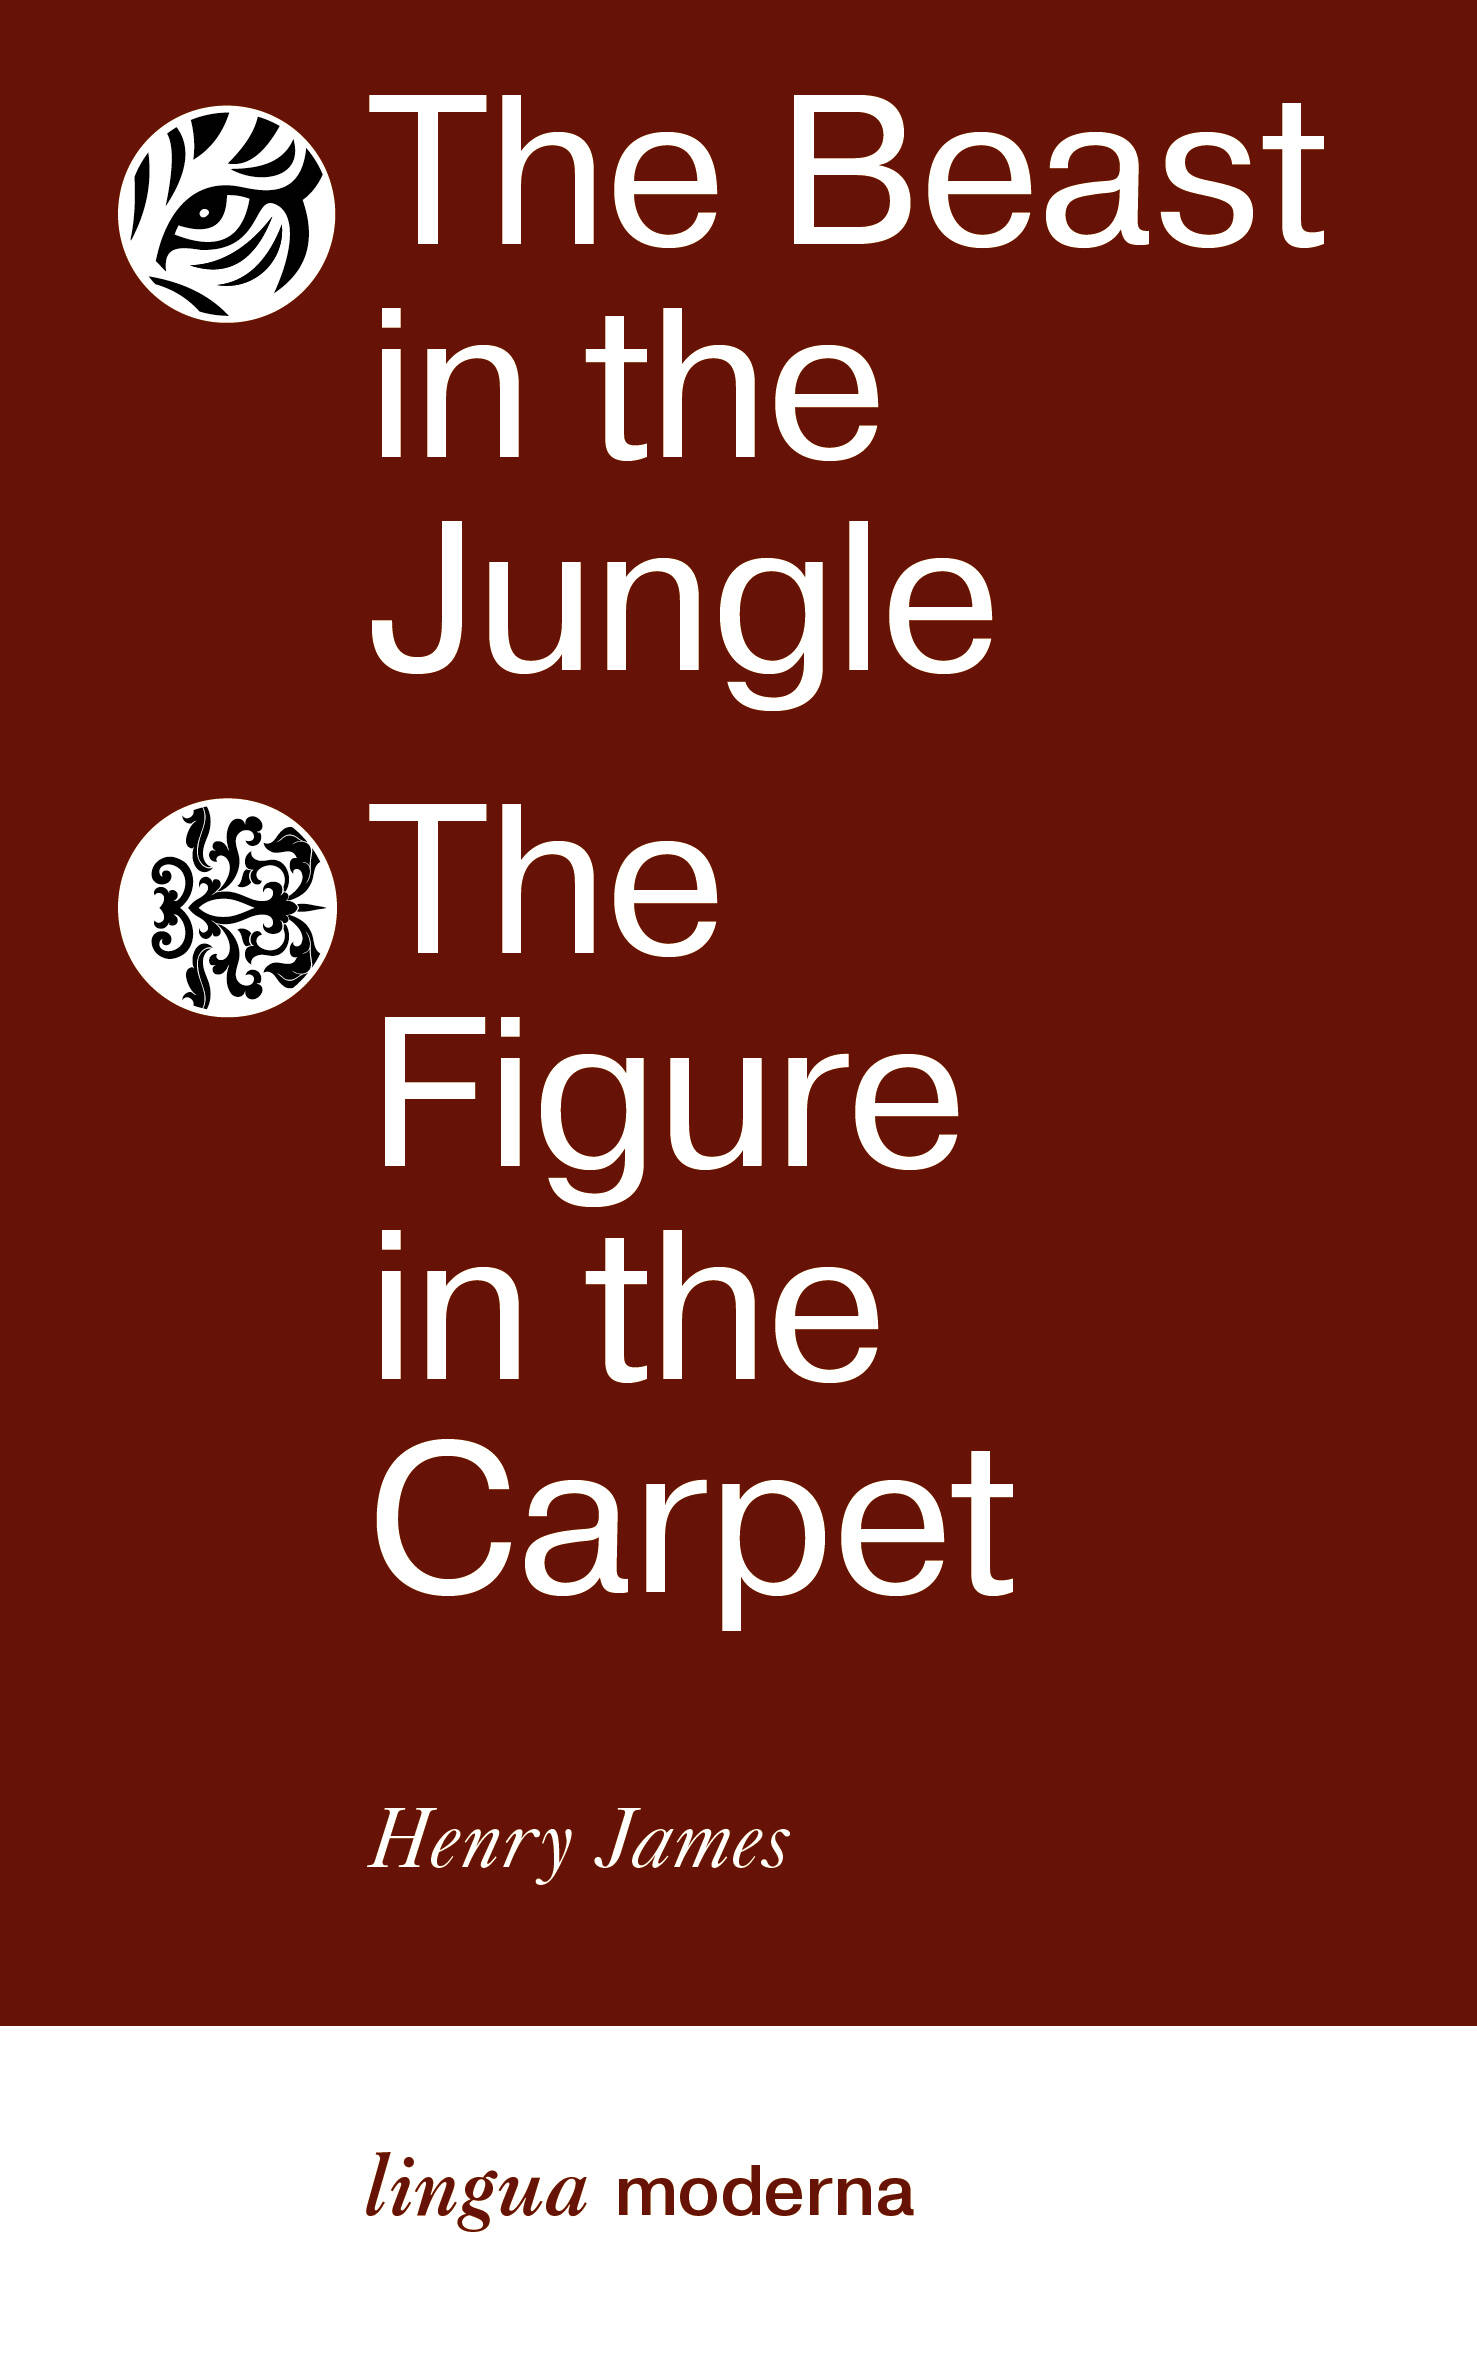 The Beast in the Jungle. The Figure in the Carpet джеймс генри the reverberator ревебератор на английском языке